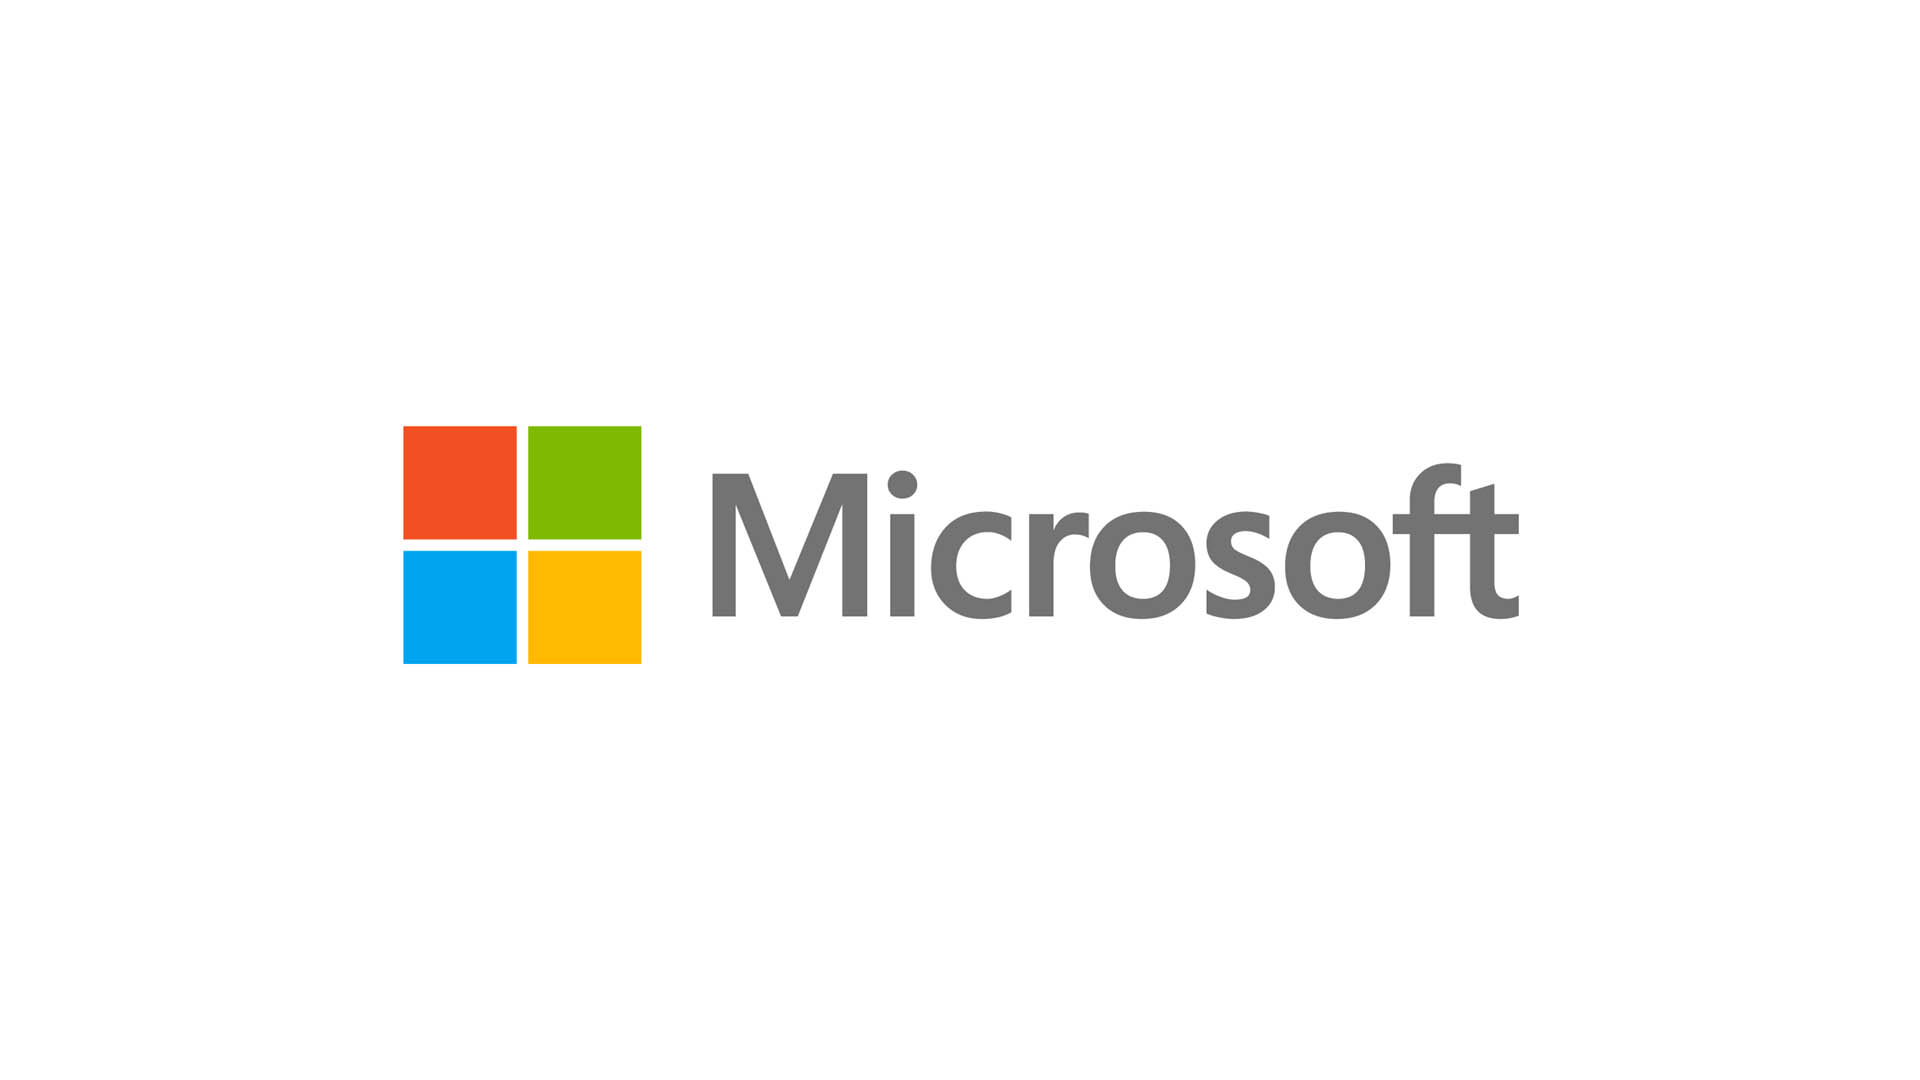 Microsoft and Cloud Software Group partner to develop new cloud and AI solutions